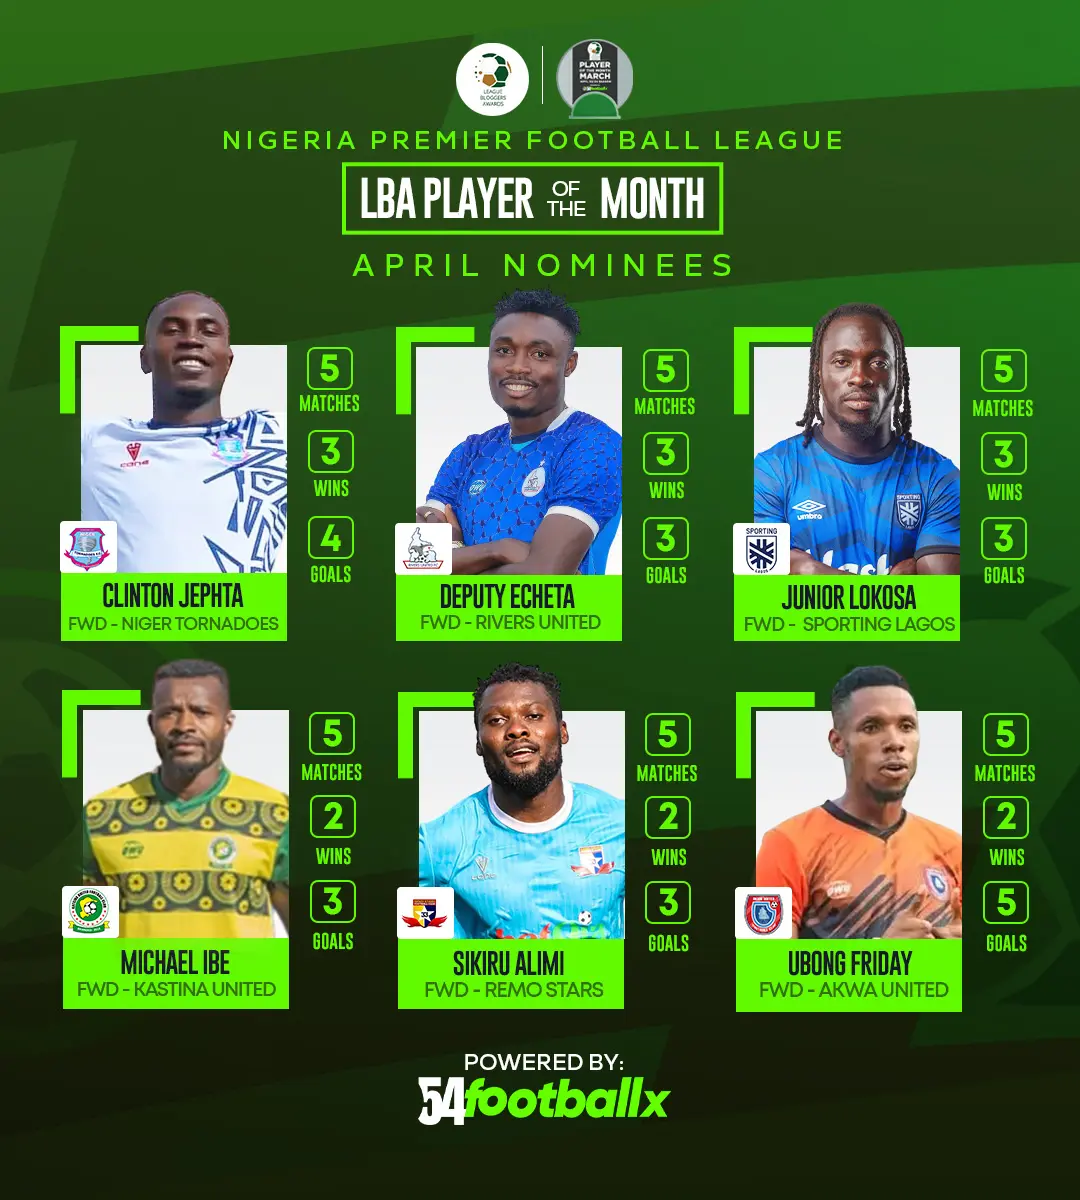 Six players nominated for NPFL monthly award